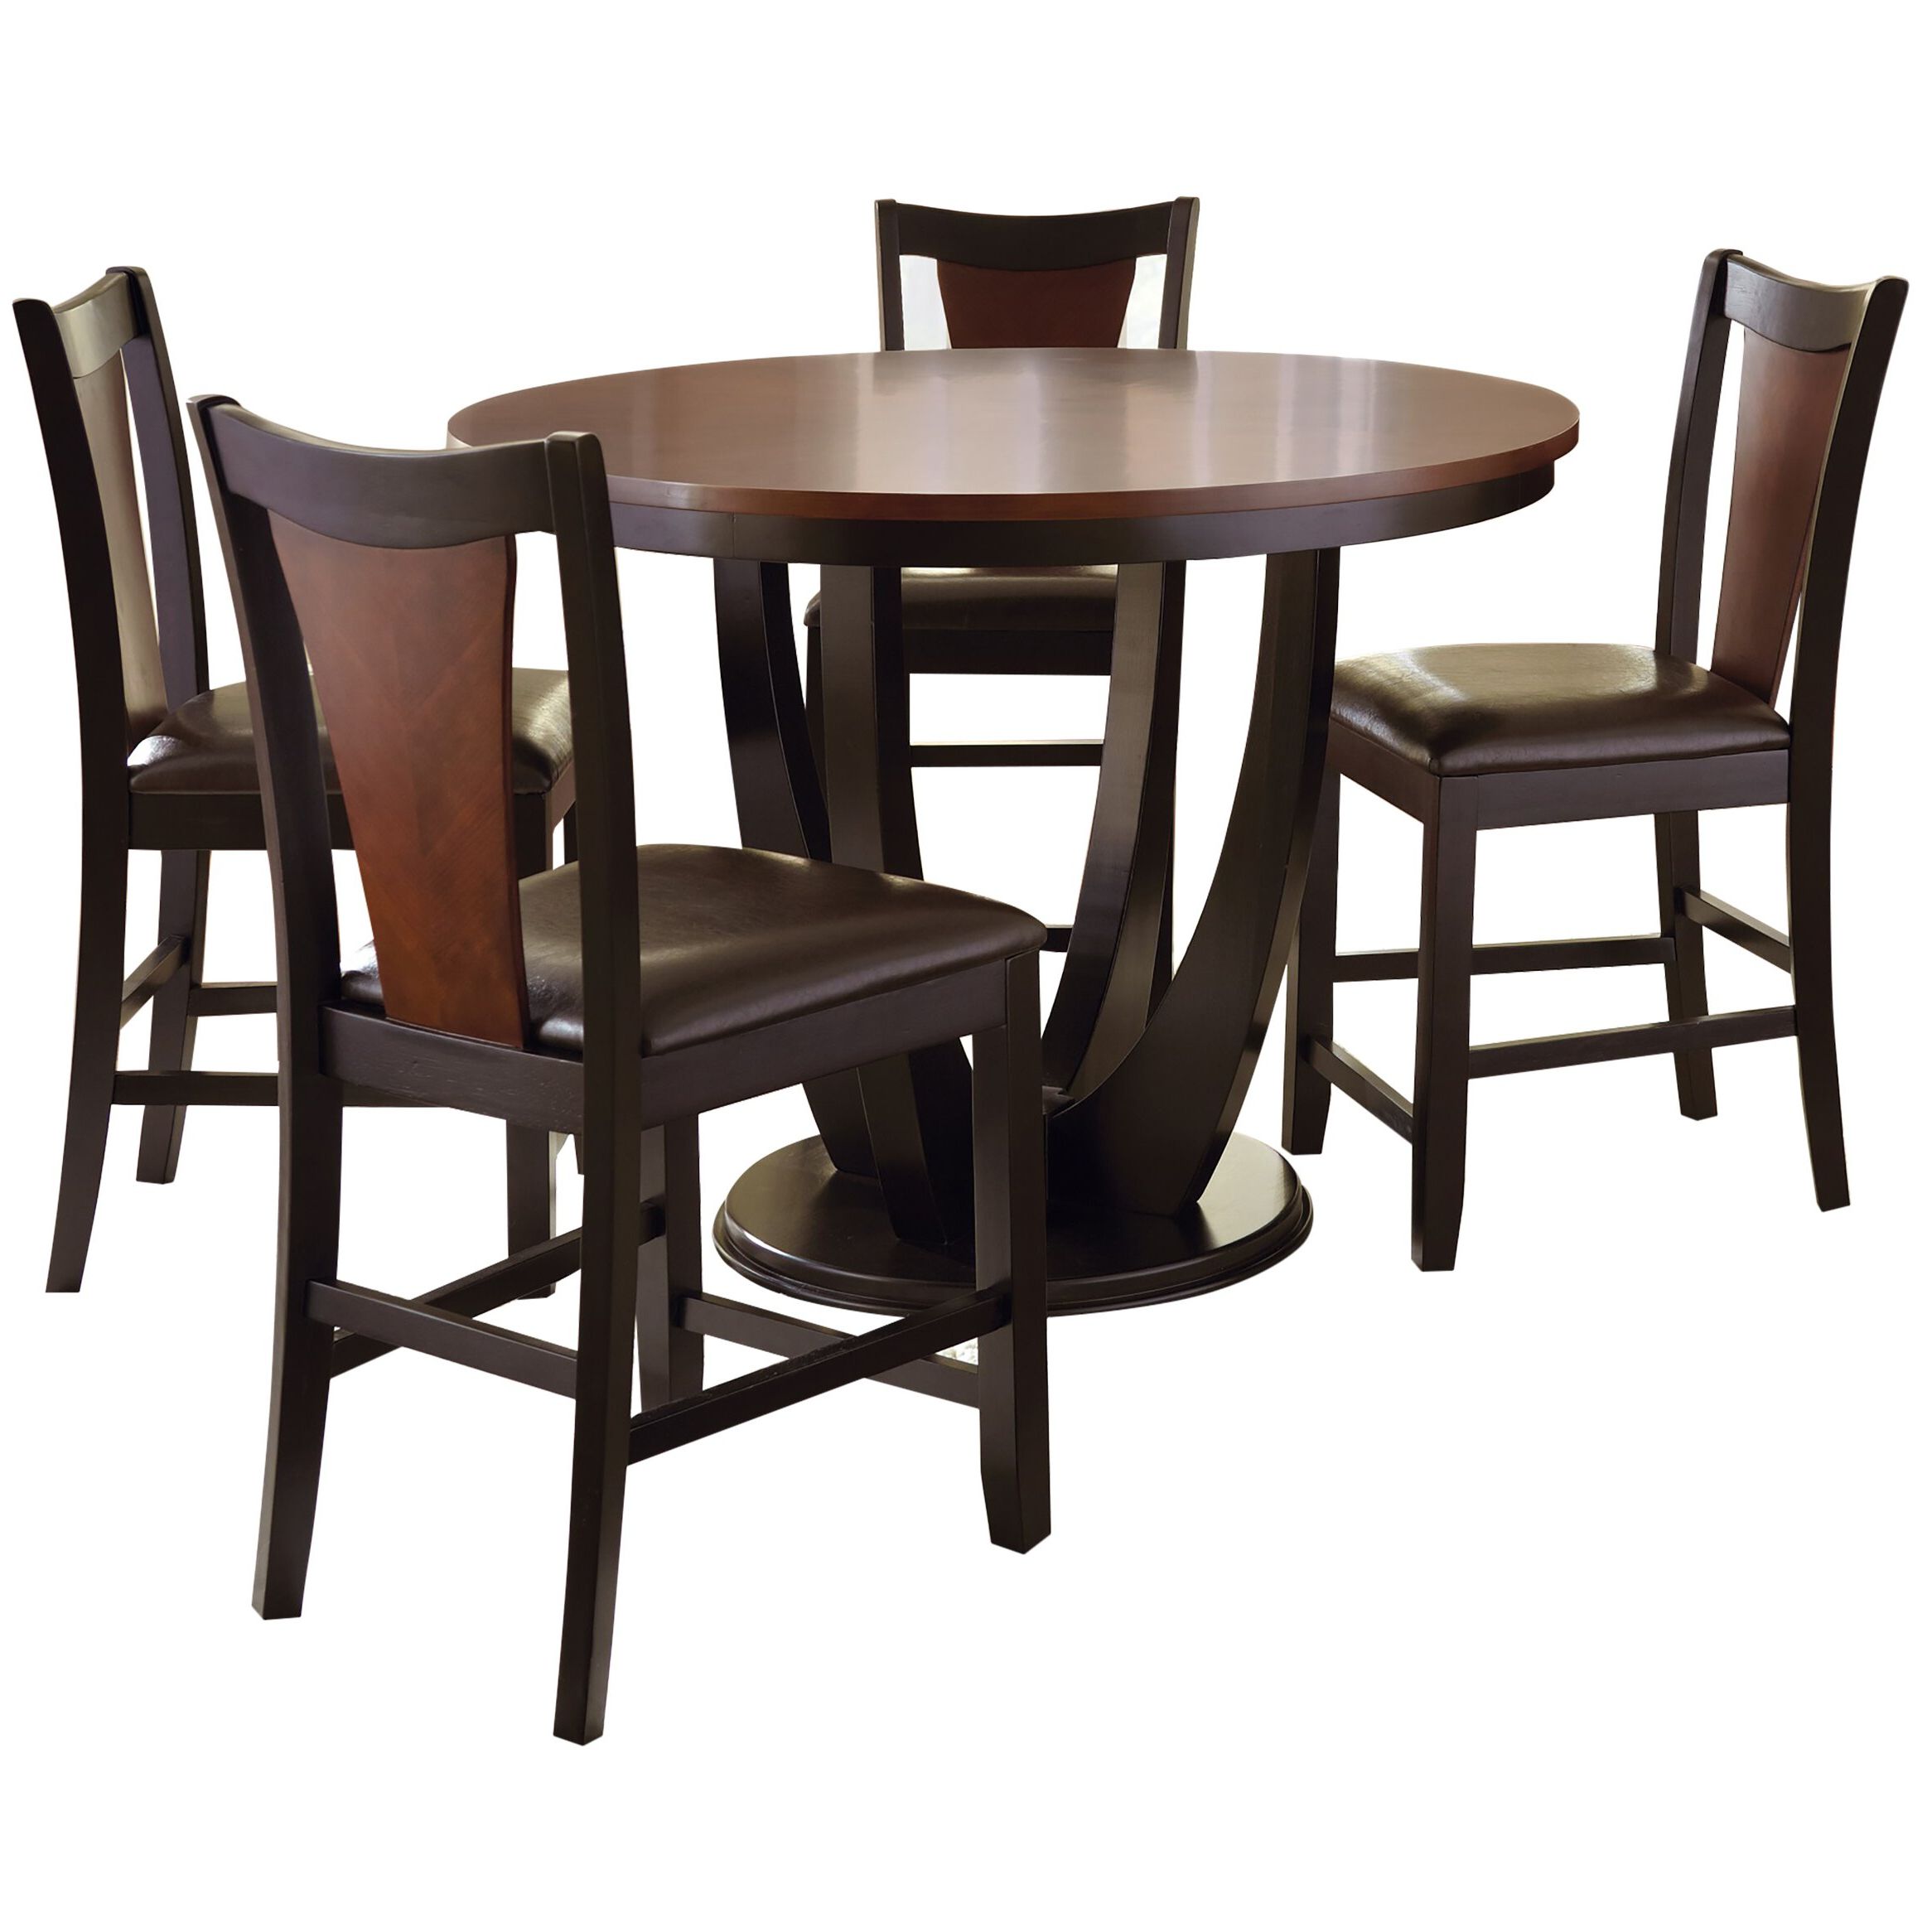 Wayfair With Regard To Widely Used Counter Height Pedestal Dining Tables (View 12 of 20)